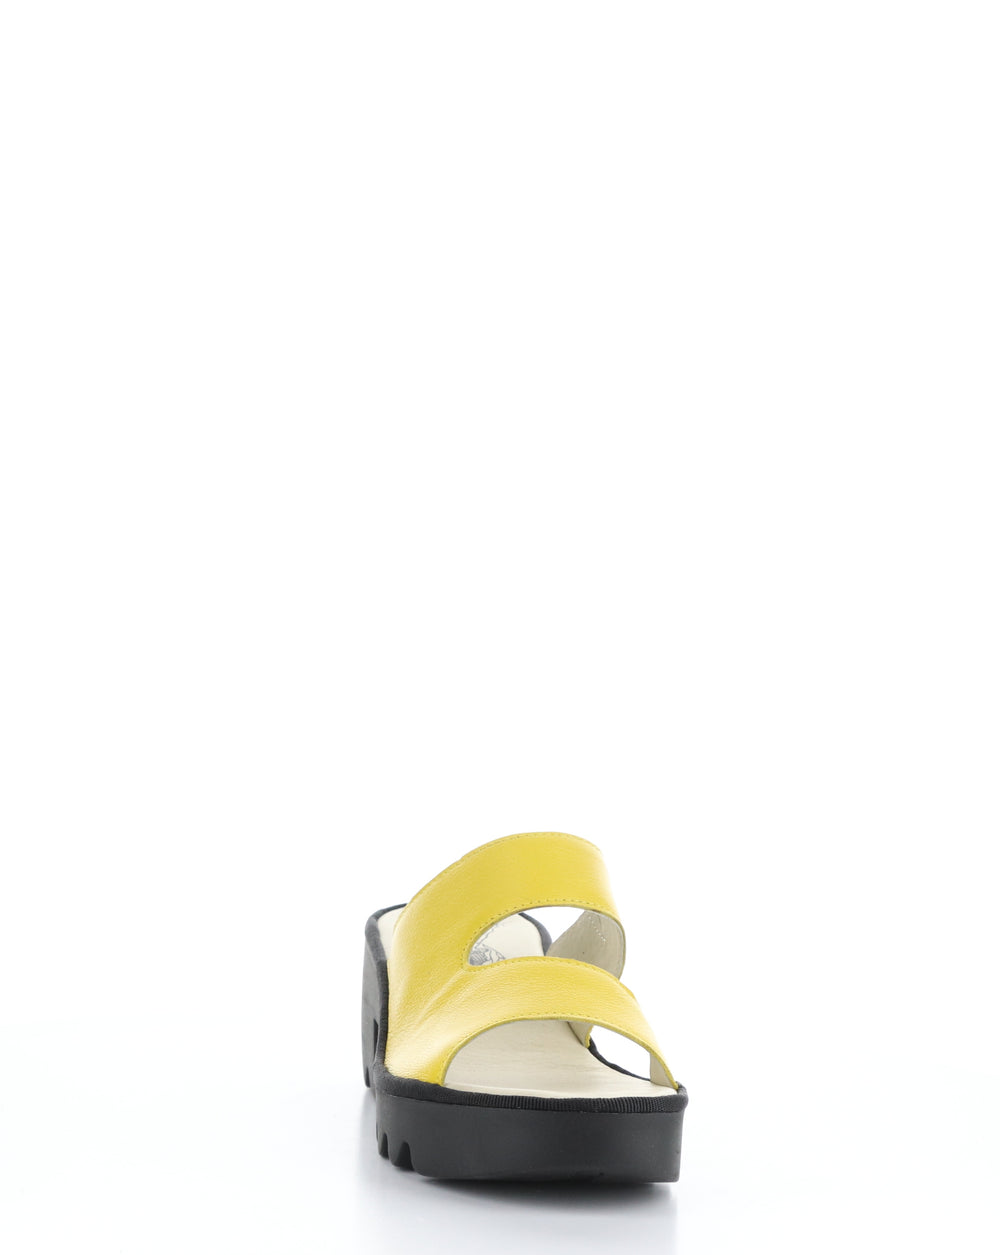 TECH493FLY 006 YELLOW Slip-on Sandals